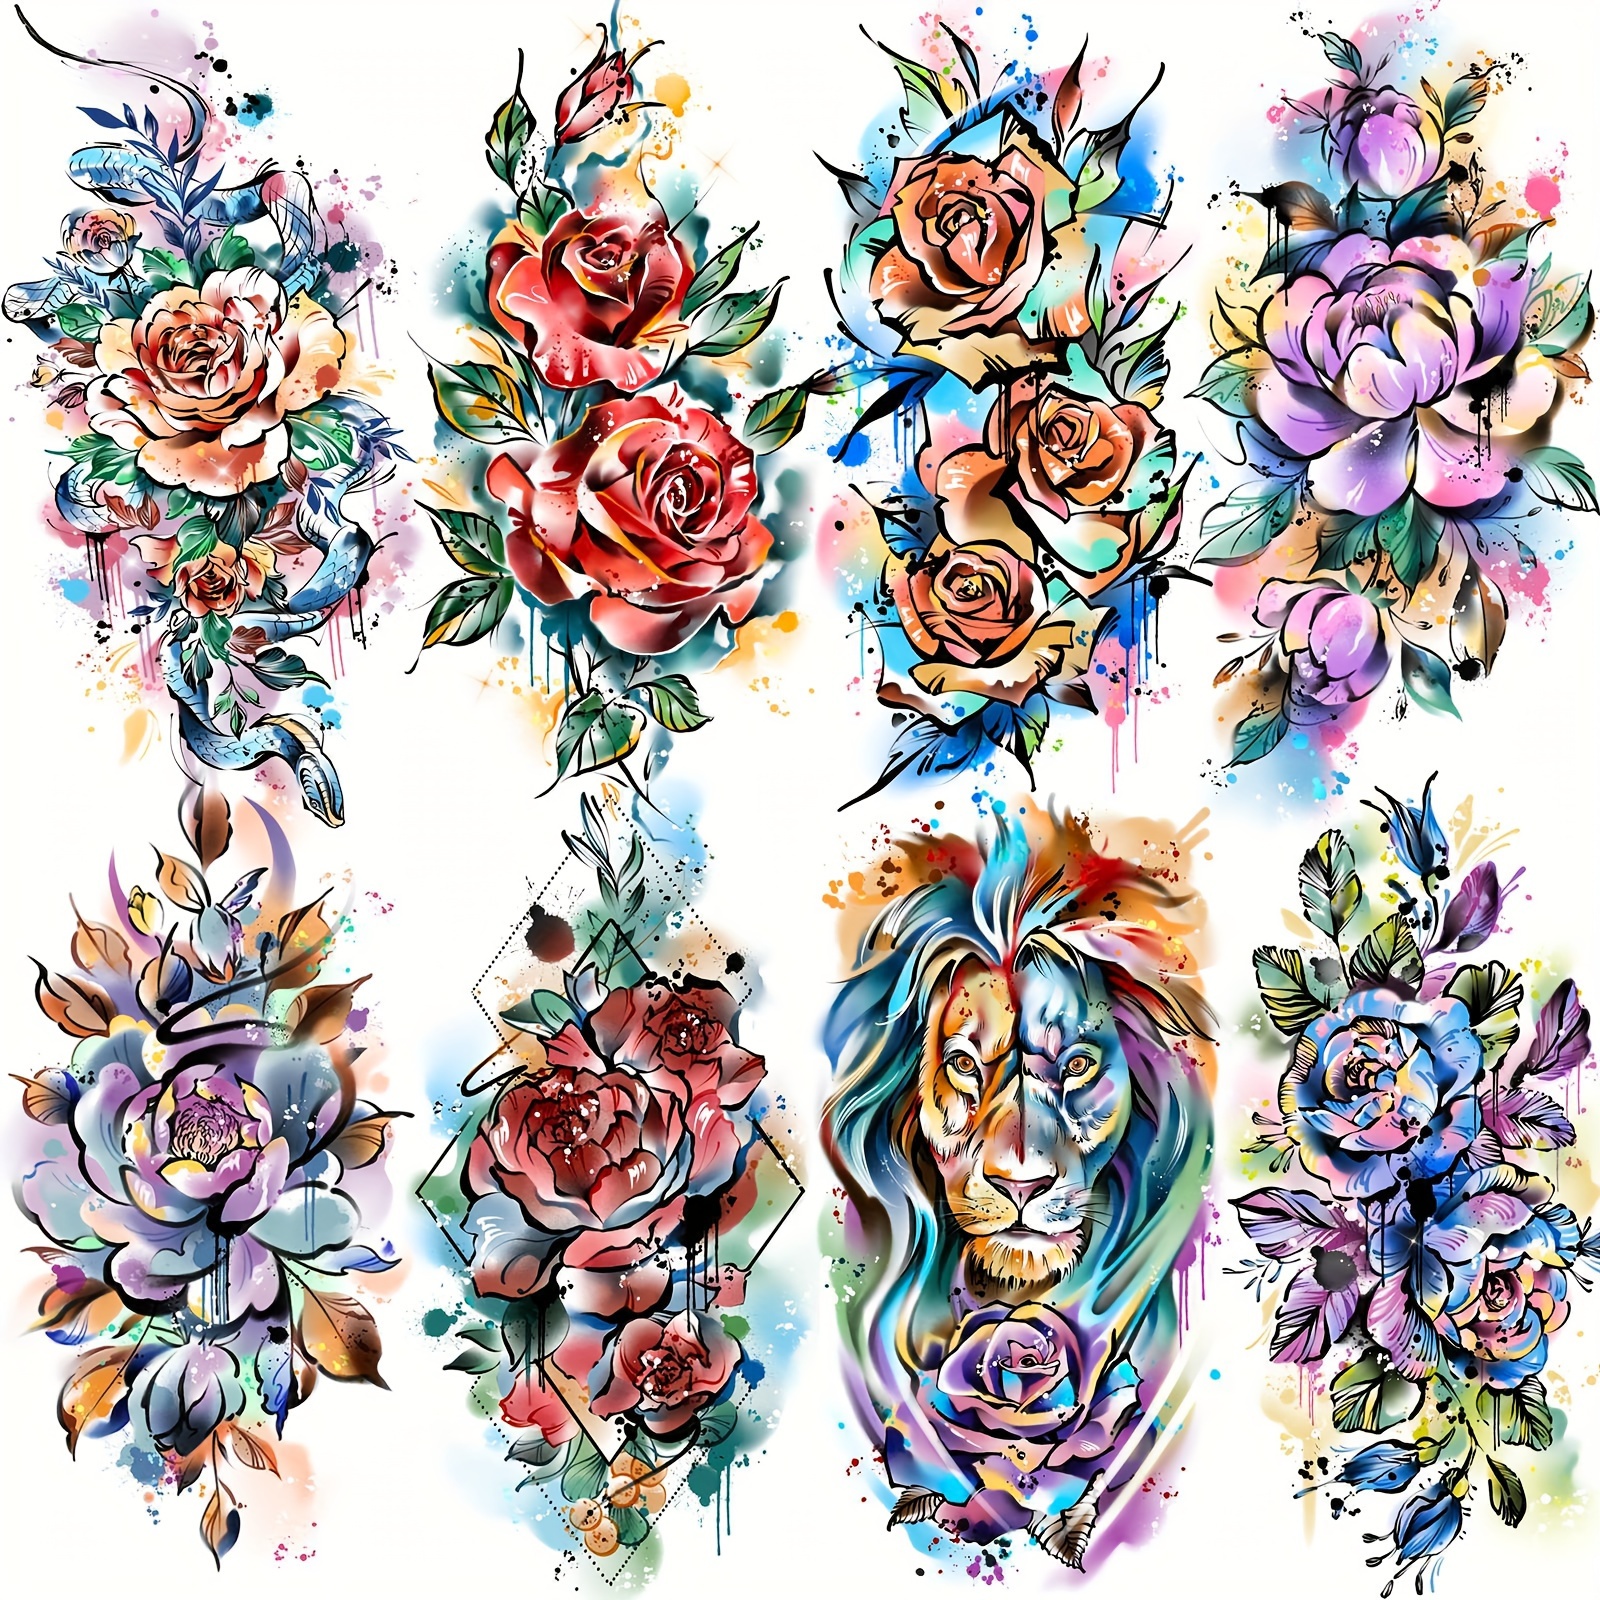 

8 Sheets Beautiful Watercolor Rose Flower Temporary Tattoos For Women Girls Adults Arm Legs, Lion Peony Long Lasting Waterproof Fake Tattoo Stickers, Blue Read Colorful Water Color Floral Tattoos